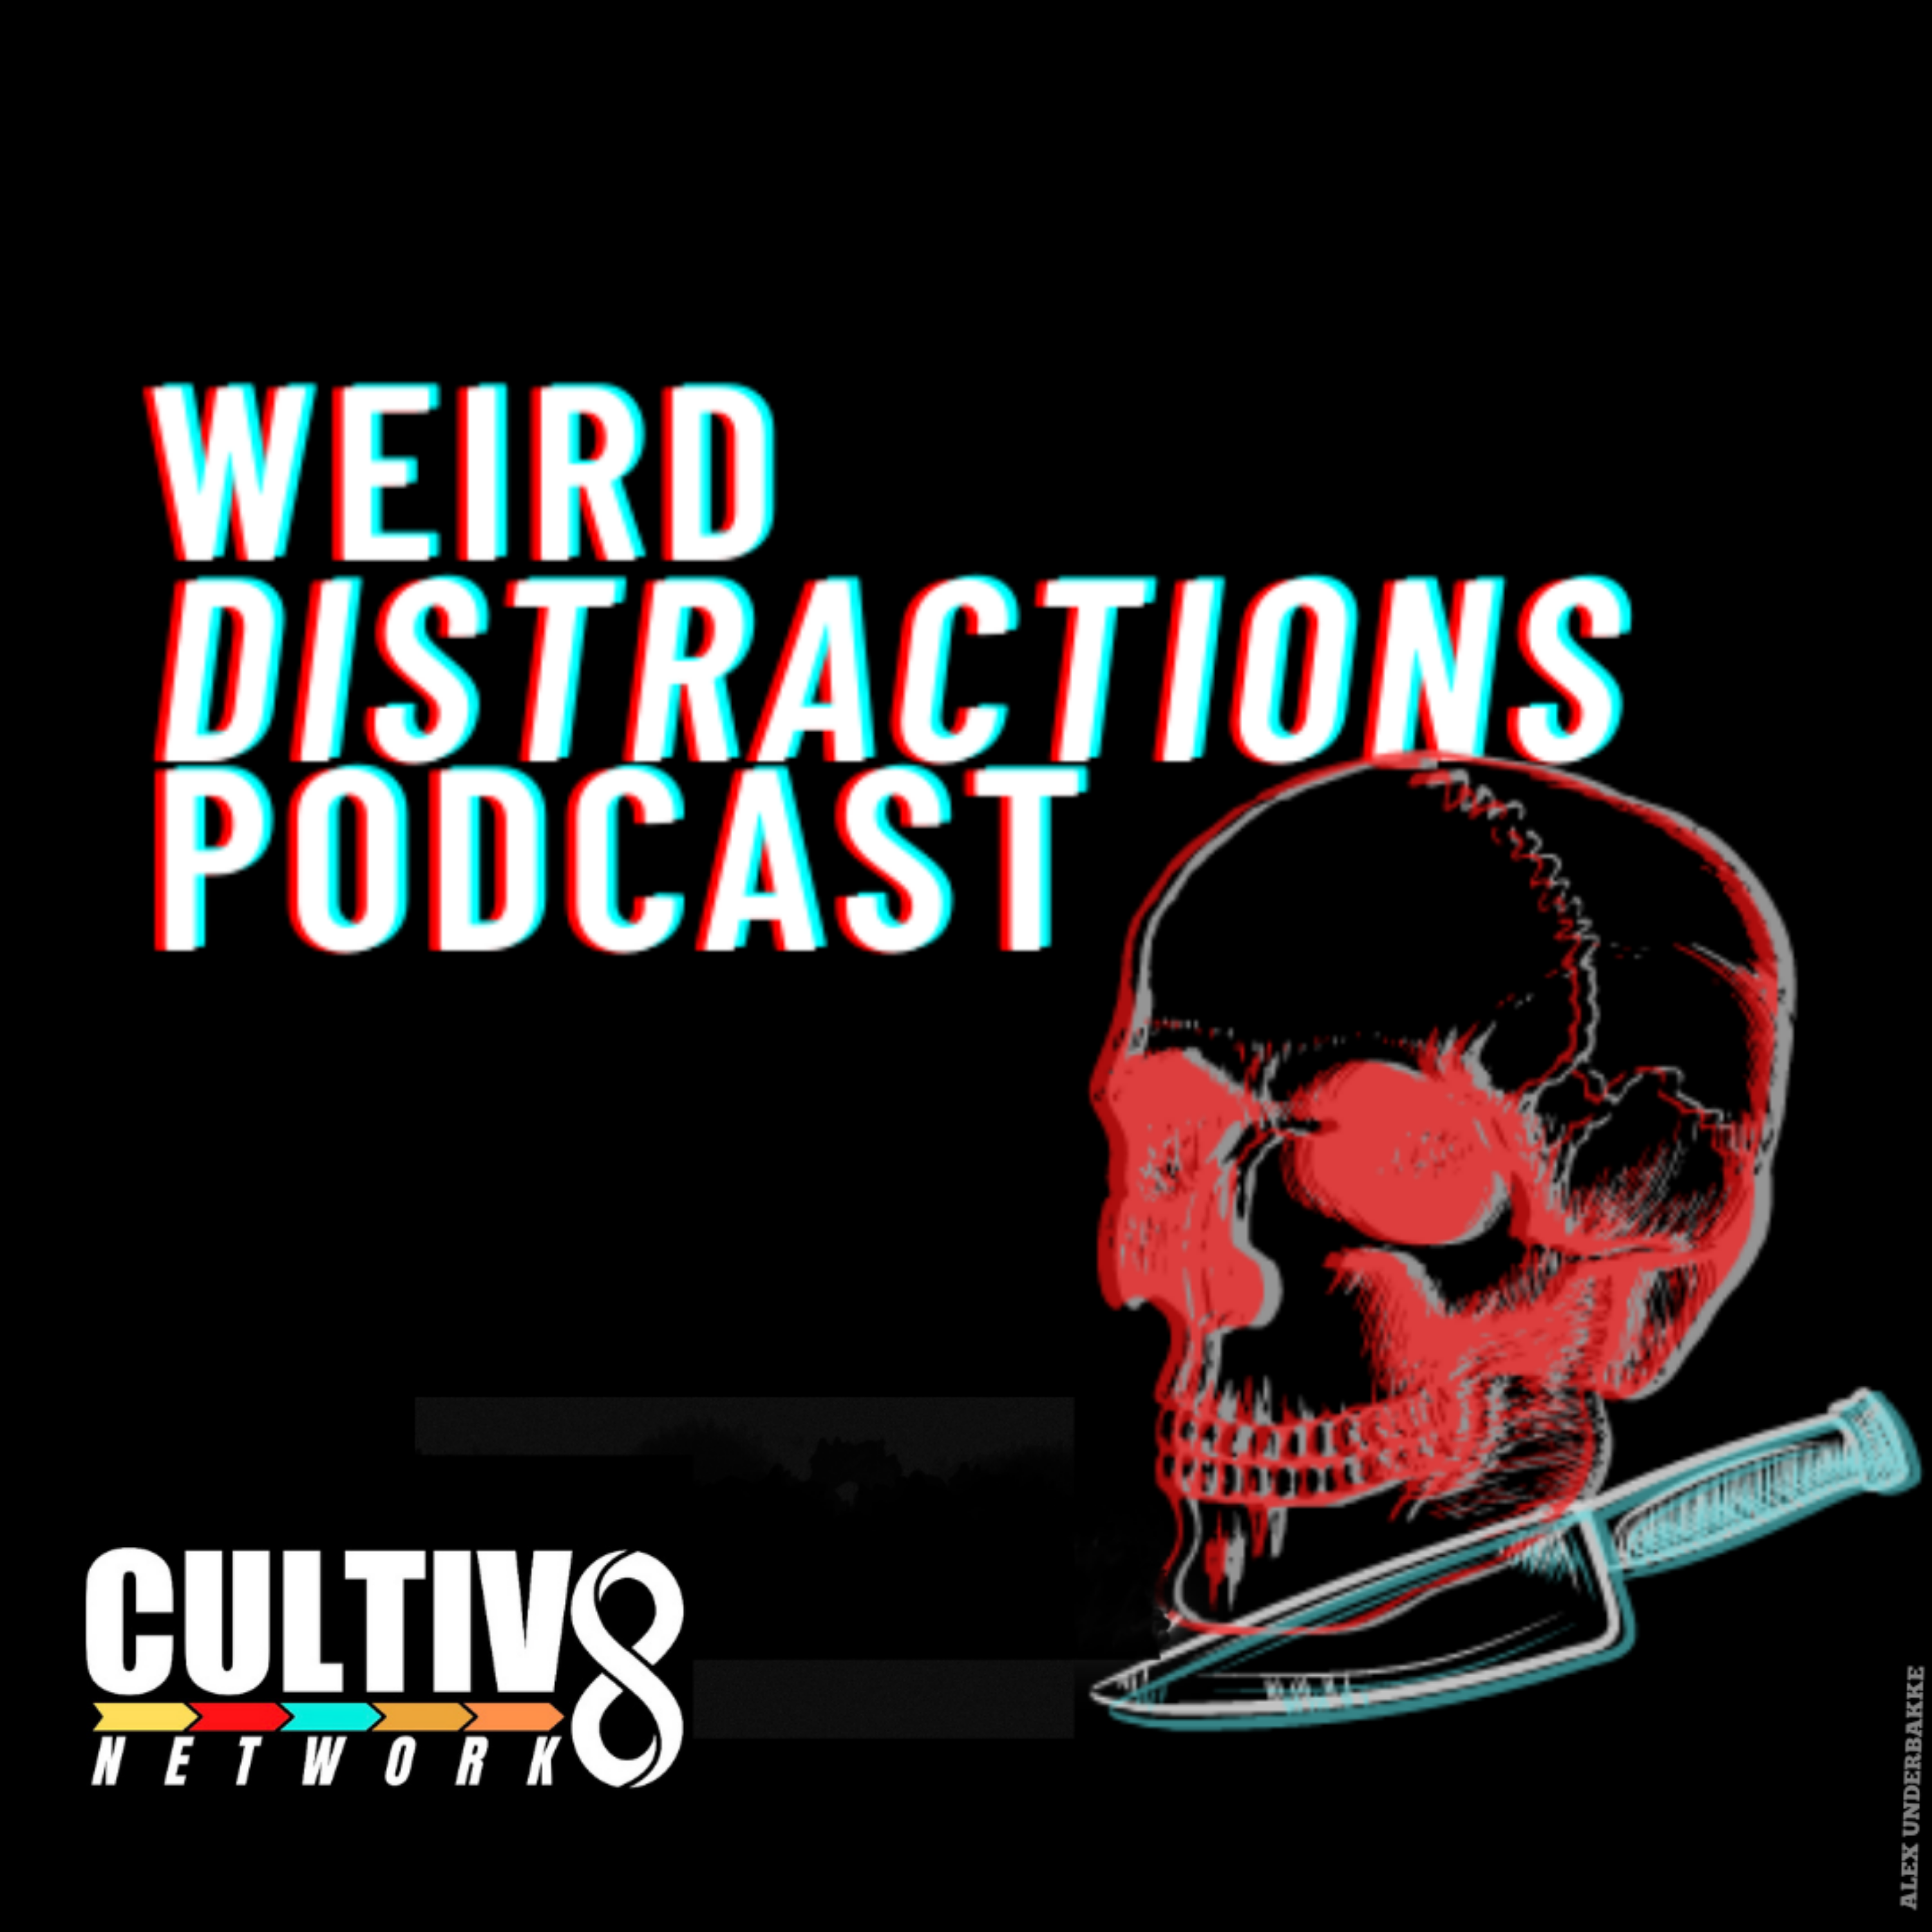 Artwork for podcast Weird Distractions Podcast